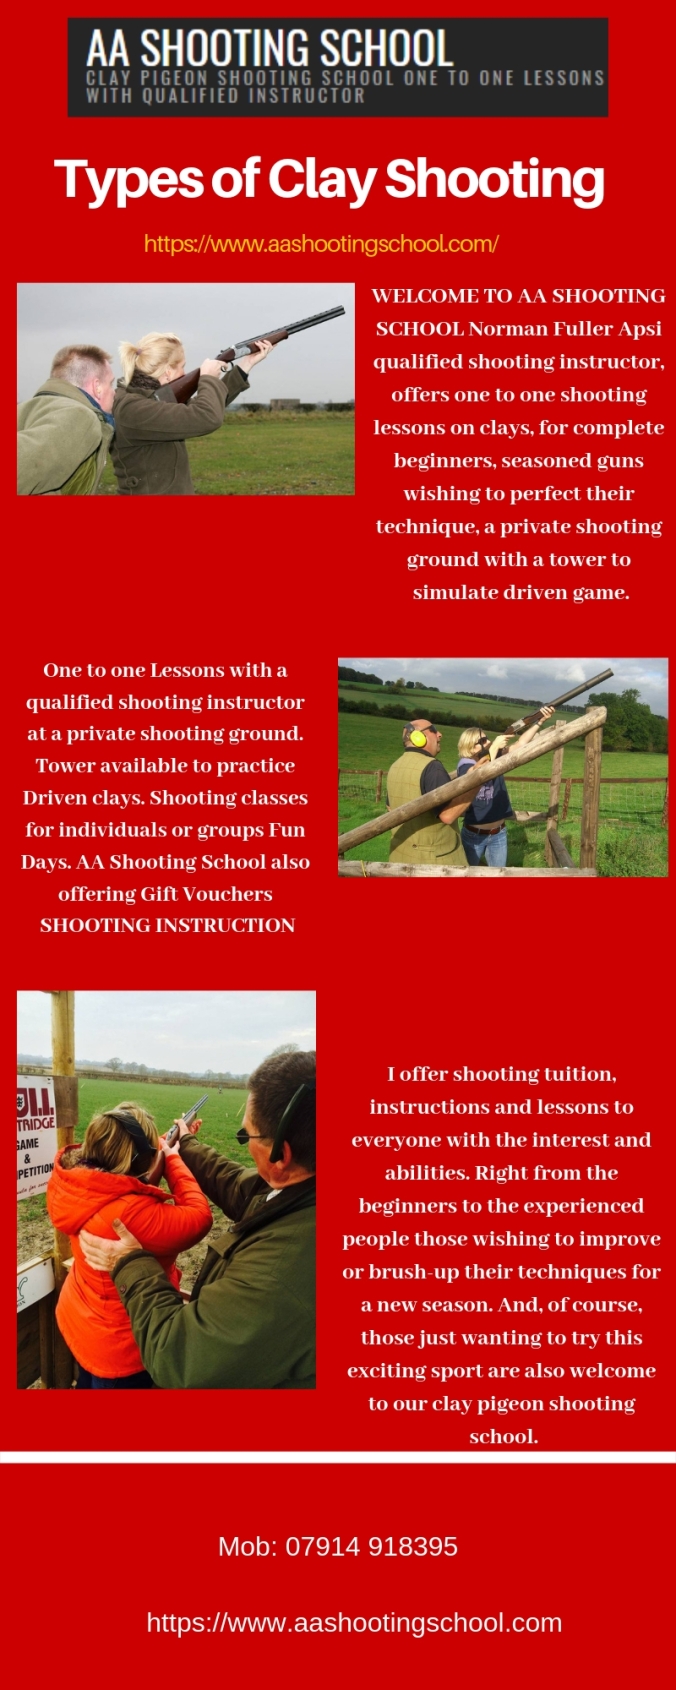 Types of Clay Shooting